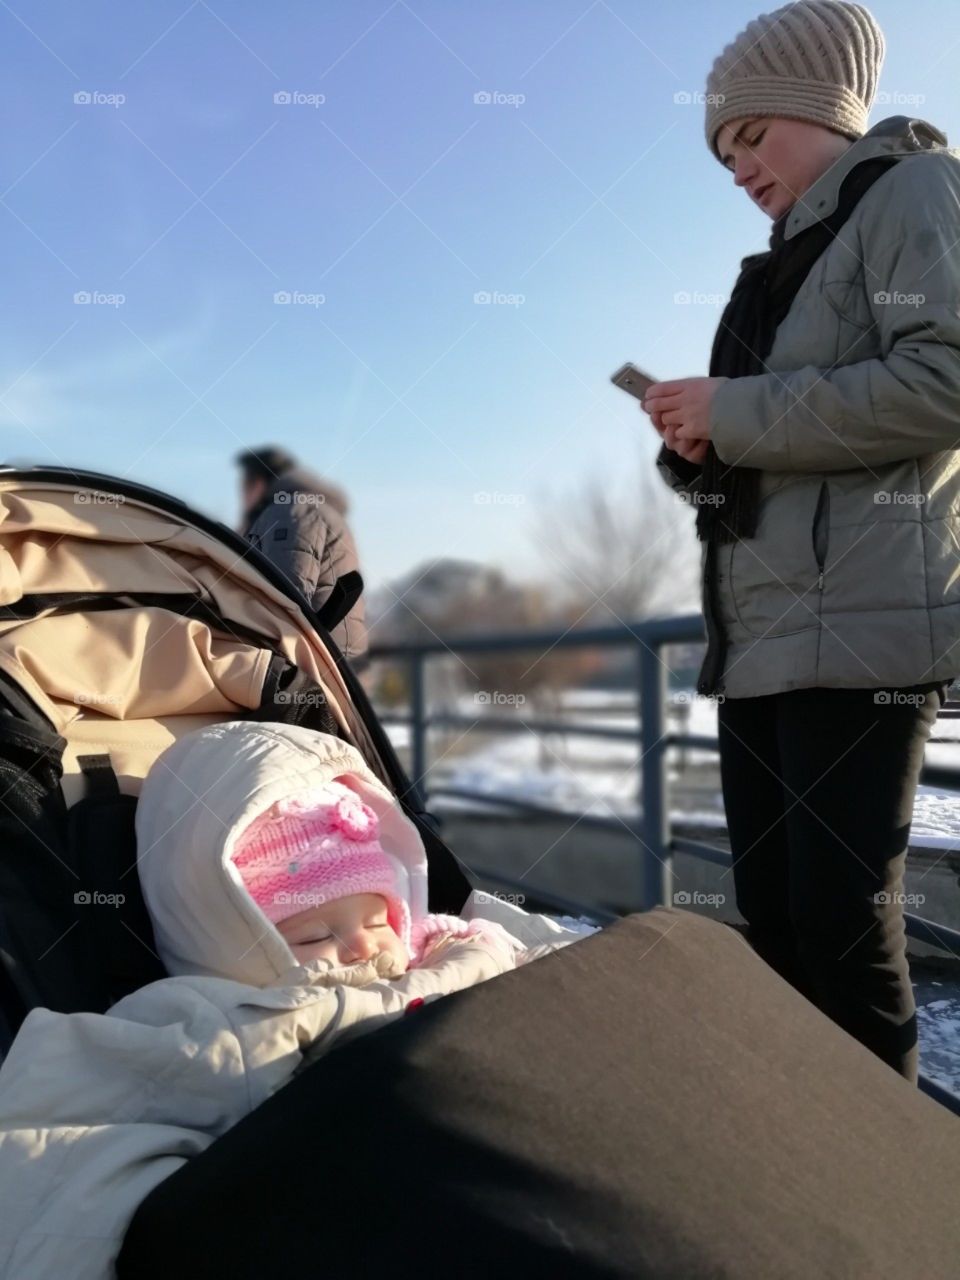 Baby girl napping in a stroller, mom checking her phone.